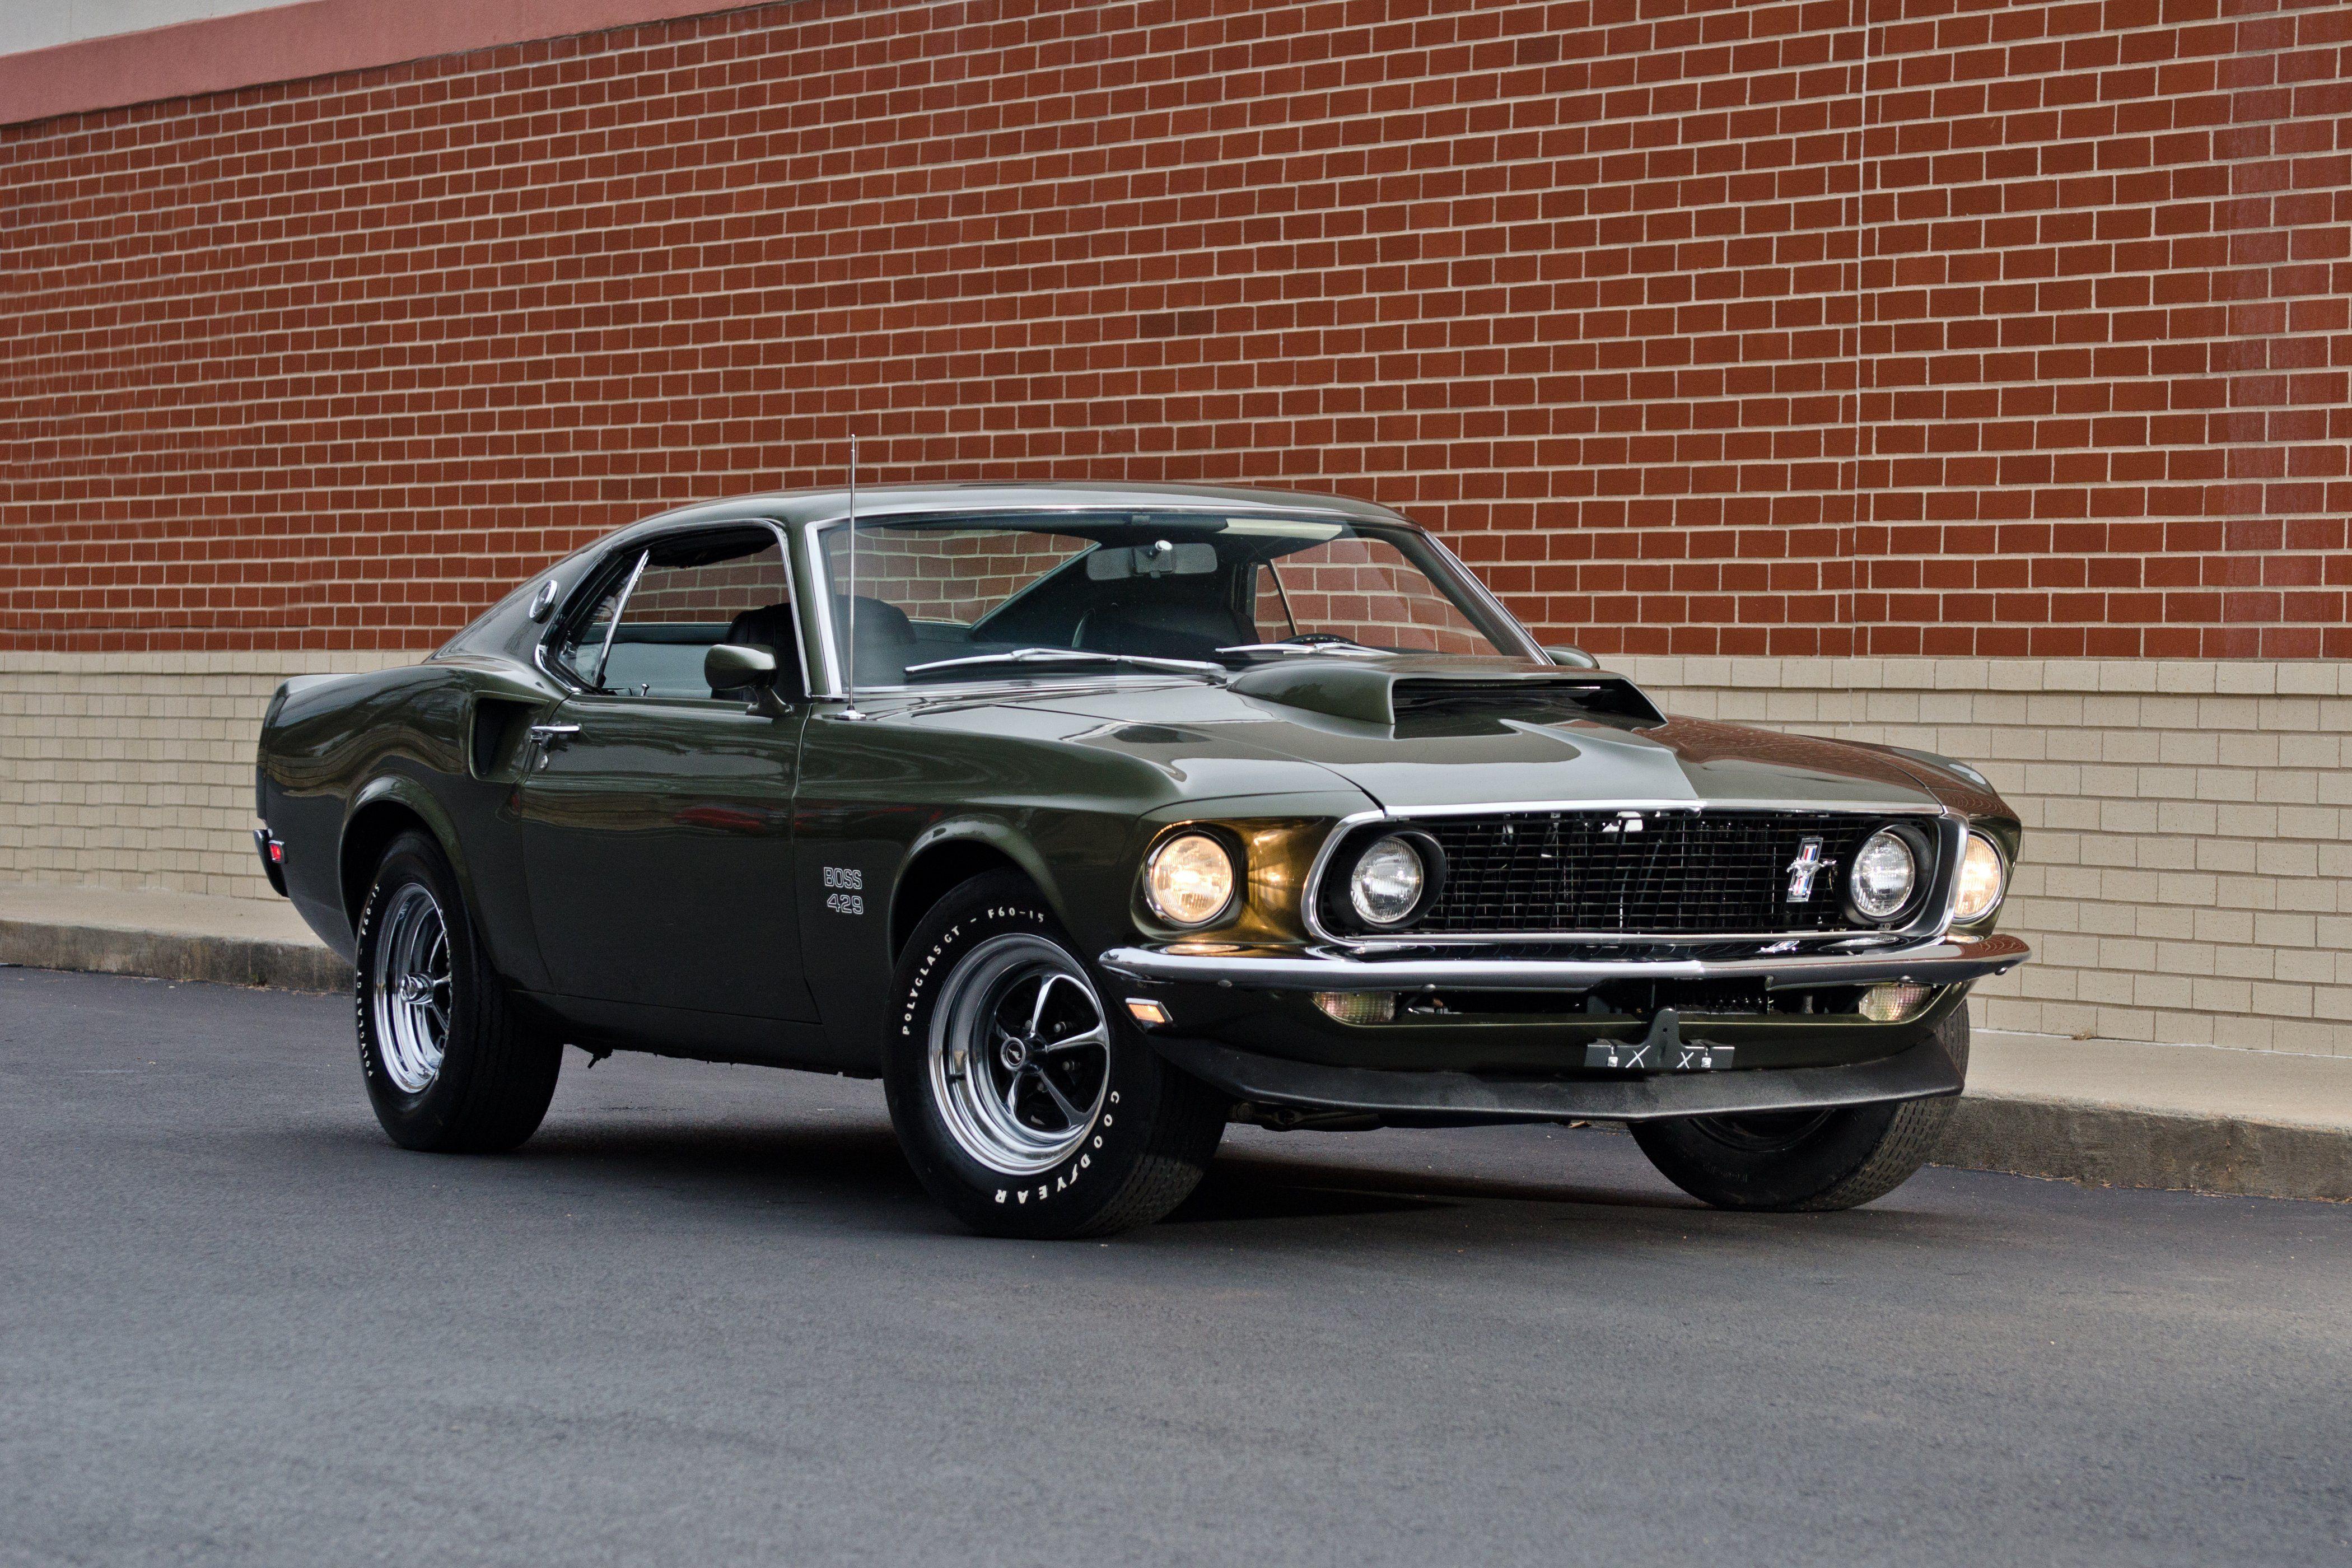 1969 Mustang Wallpapers - Top Free 1969 Mustang Backgrounds ...